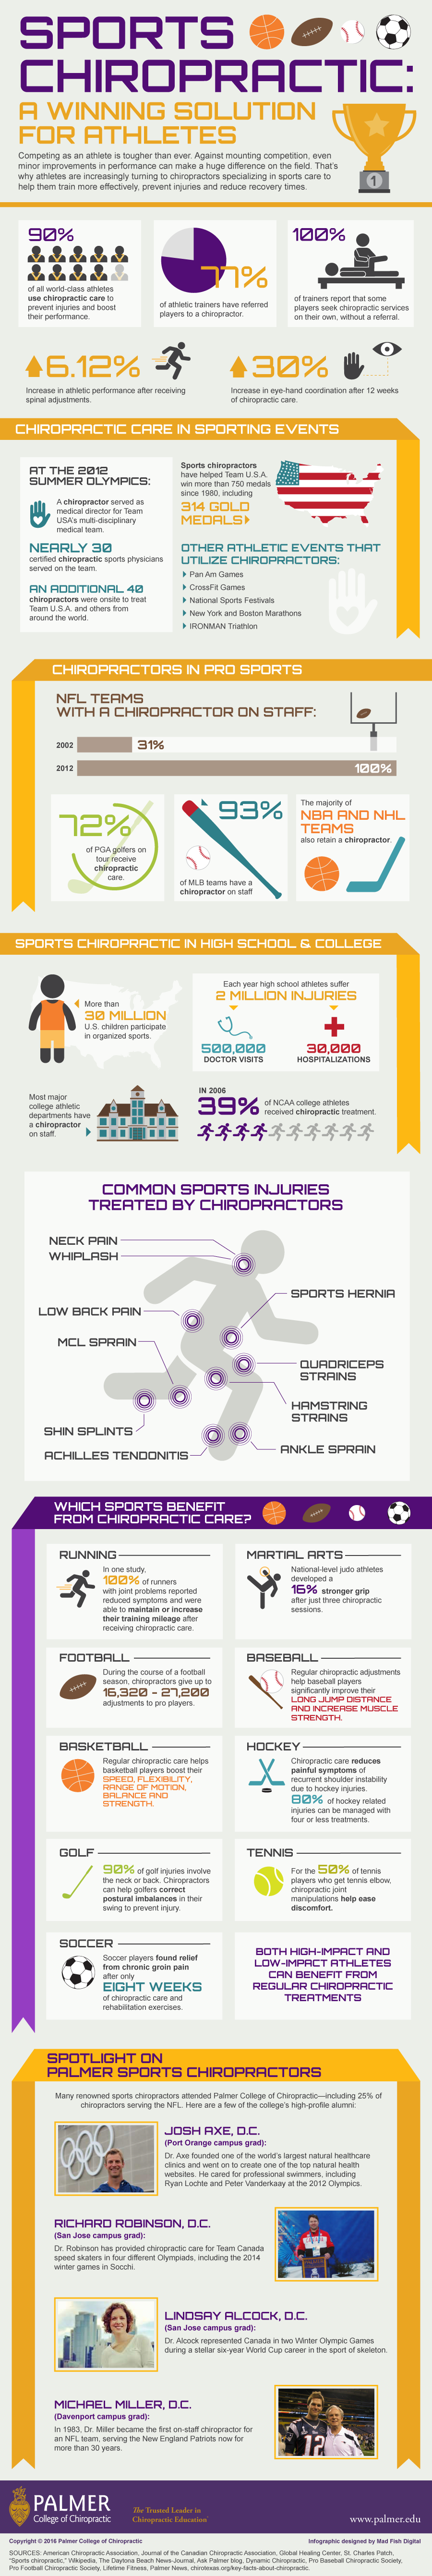 sports chiropractor infographic